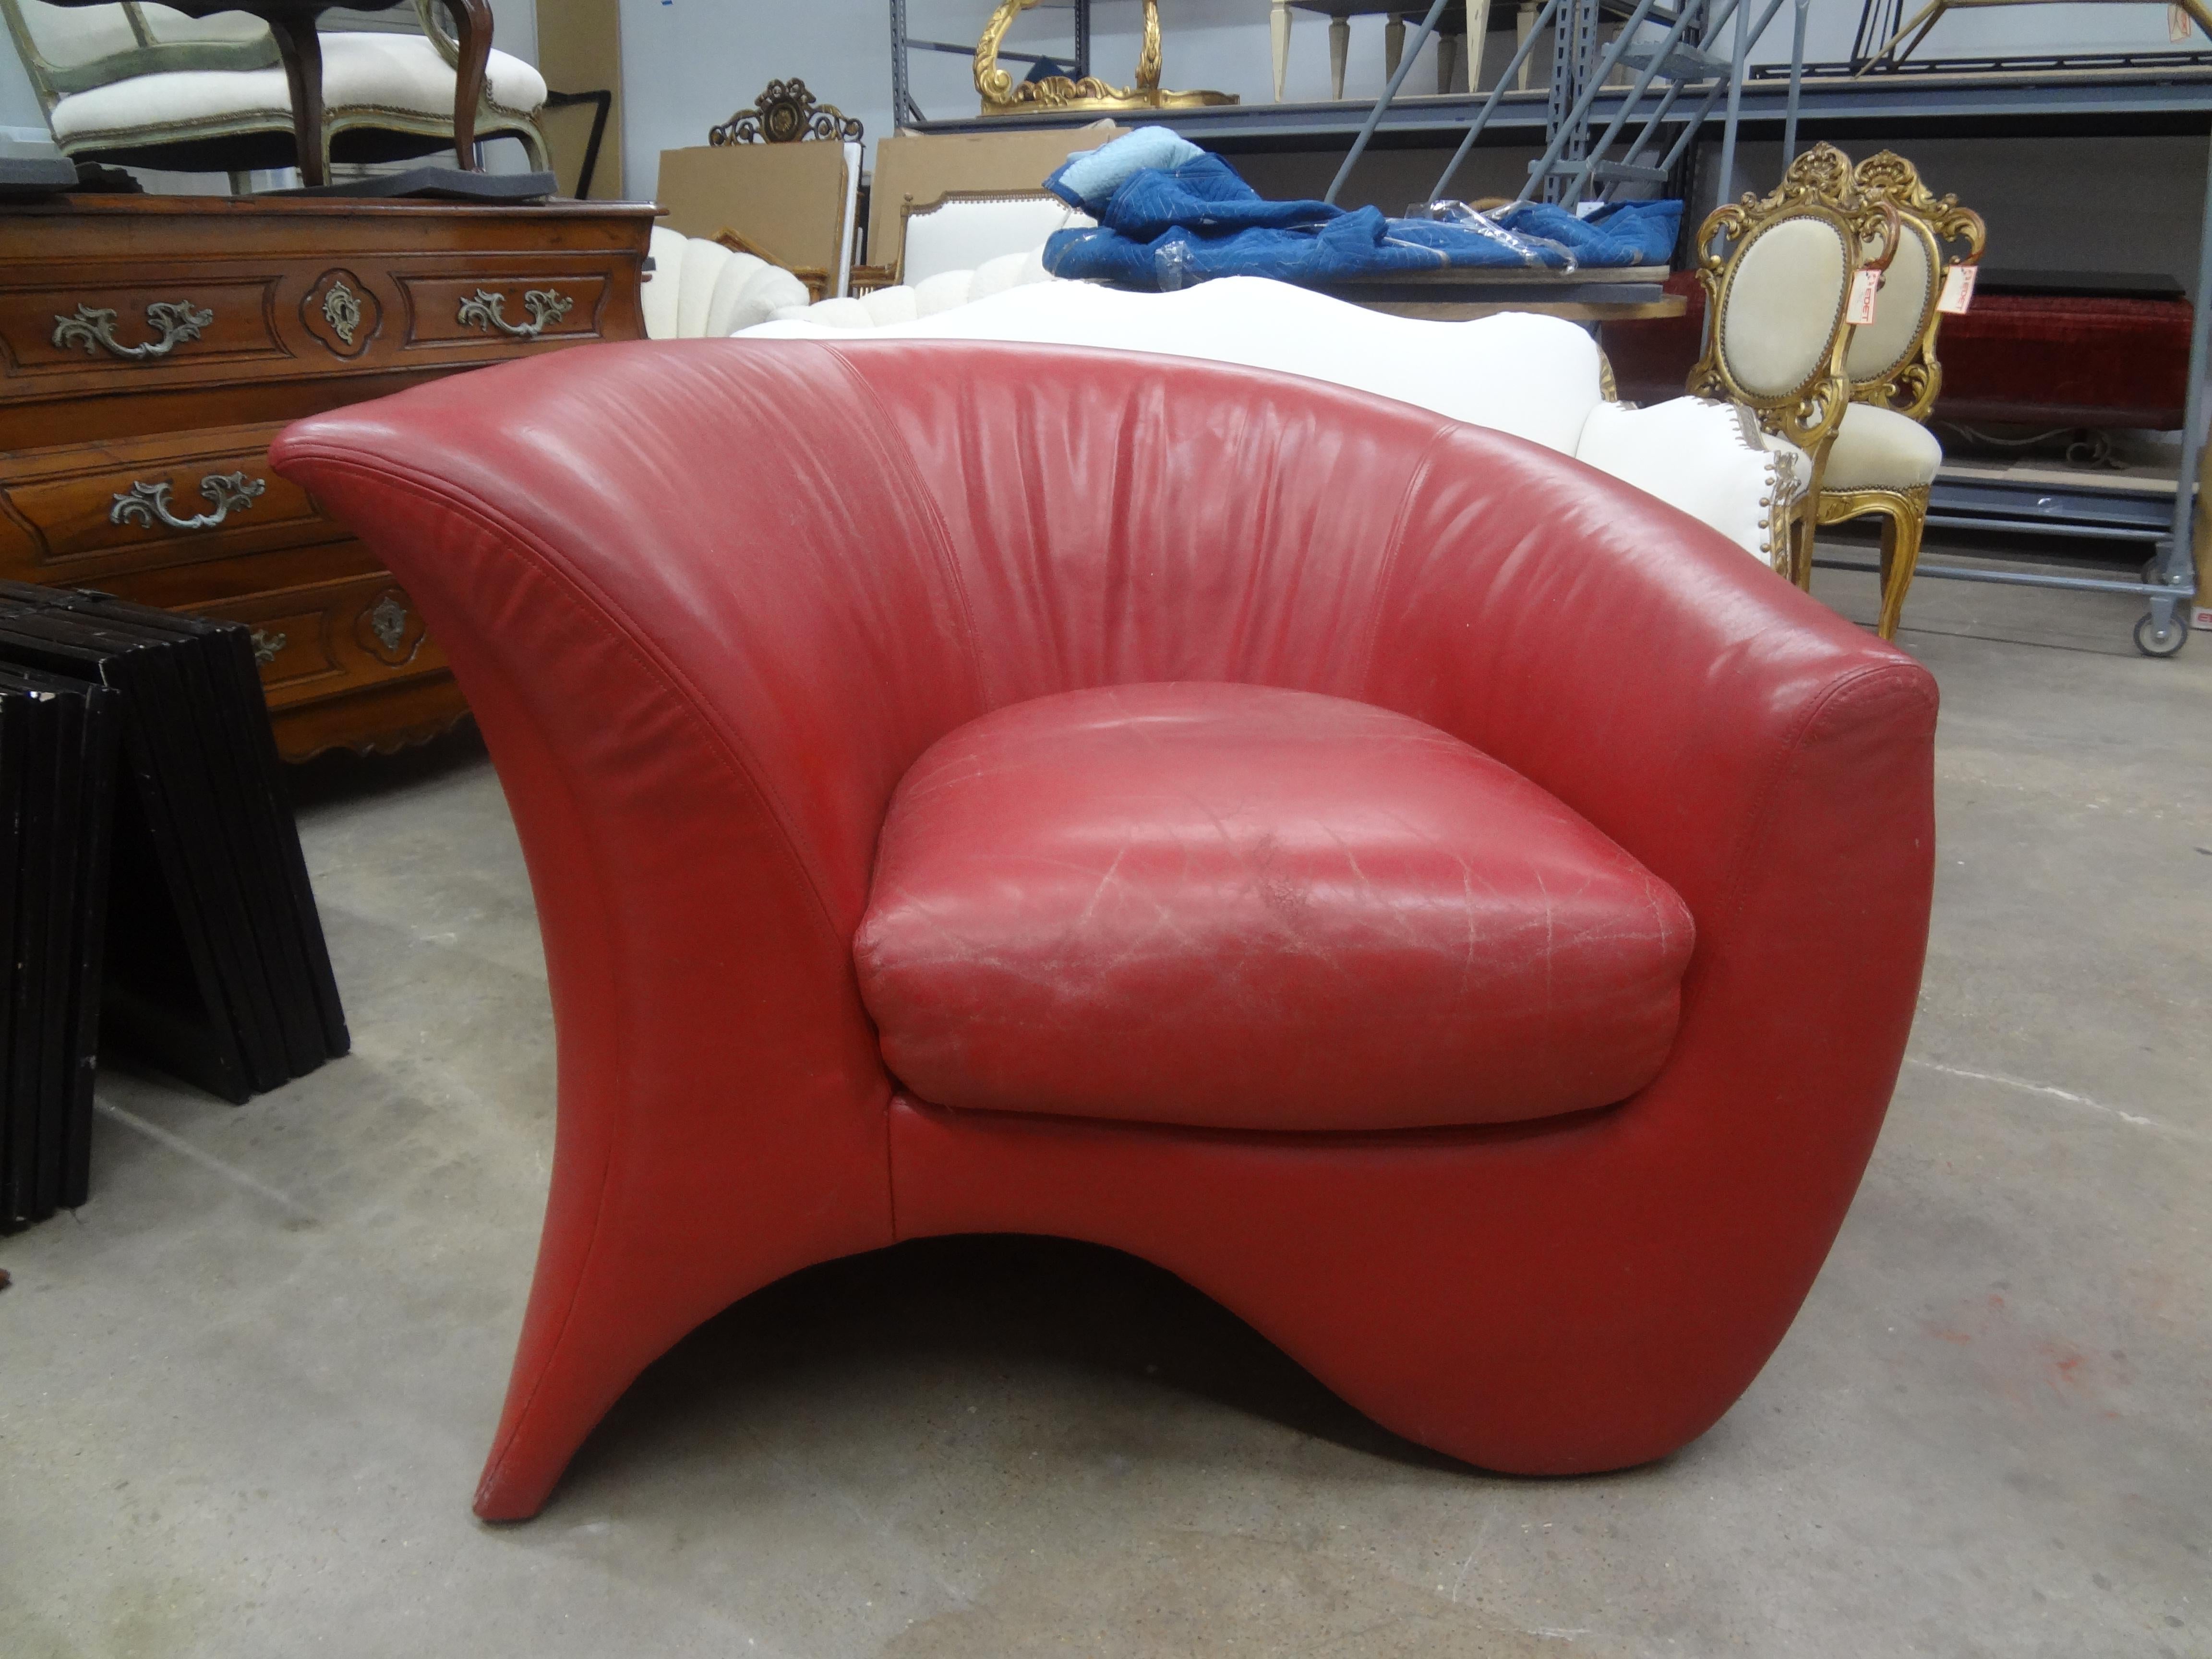 Vladimir Kagan for Directional hurricane chair.
Stunning post modern sculptural hurricane chair designed by Vladimir Kagan for Directional in the 1980s. This interesting chair retains the original red leather upholstery and is extremely